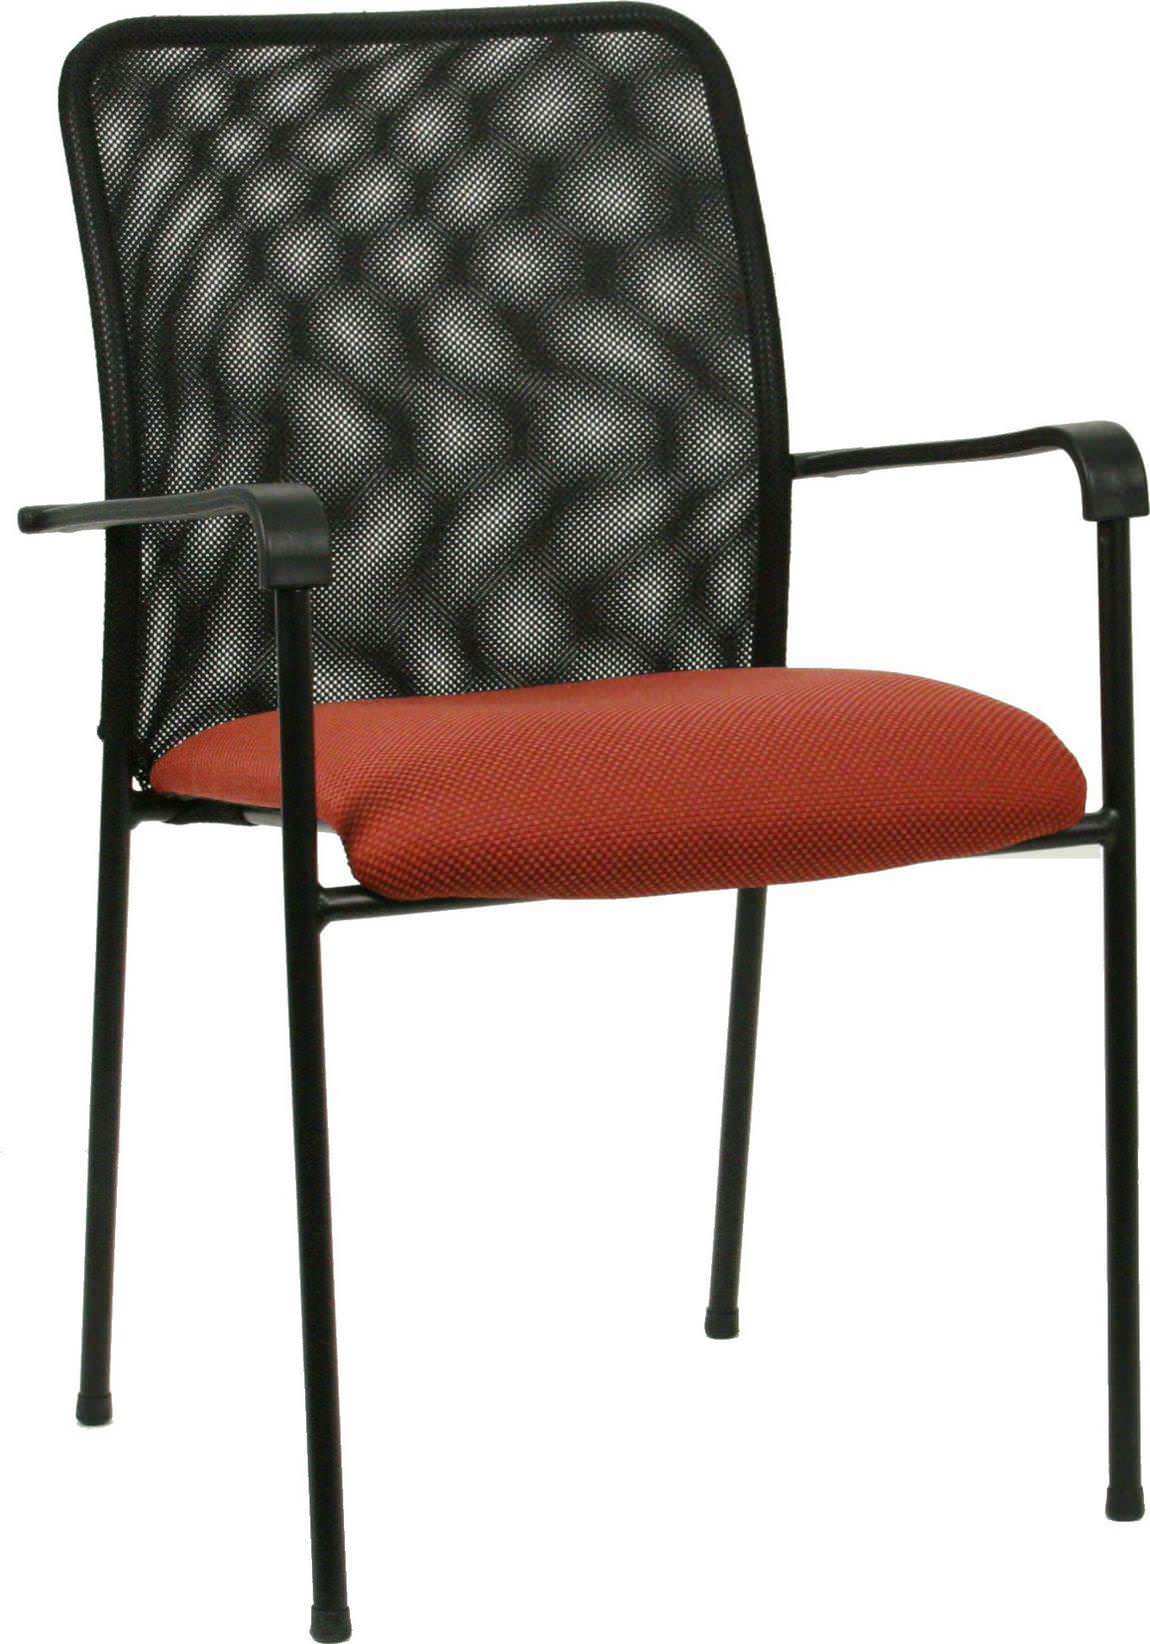 Upholstered Stacking Chair with Mesh Back